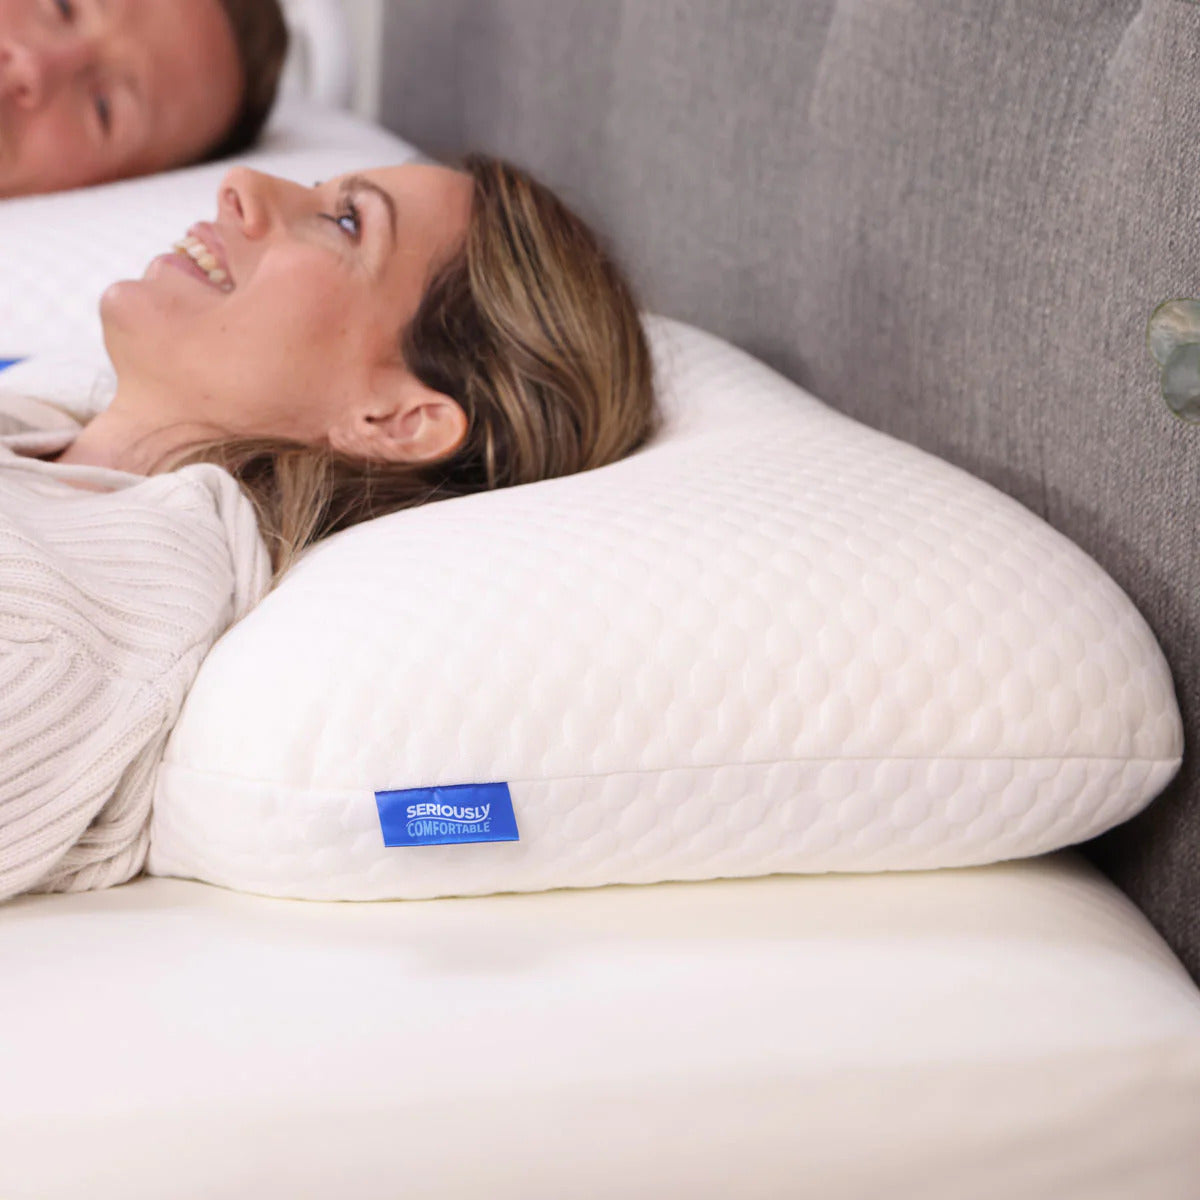 Seriously Comfortable Cool Memory Comfort Side Sleeper Pillow